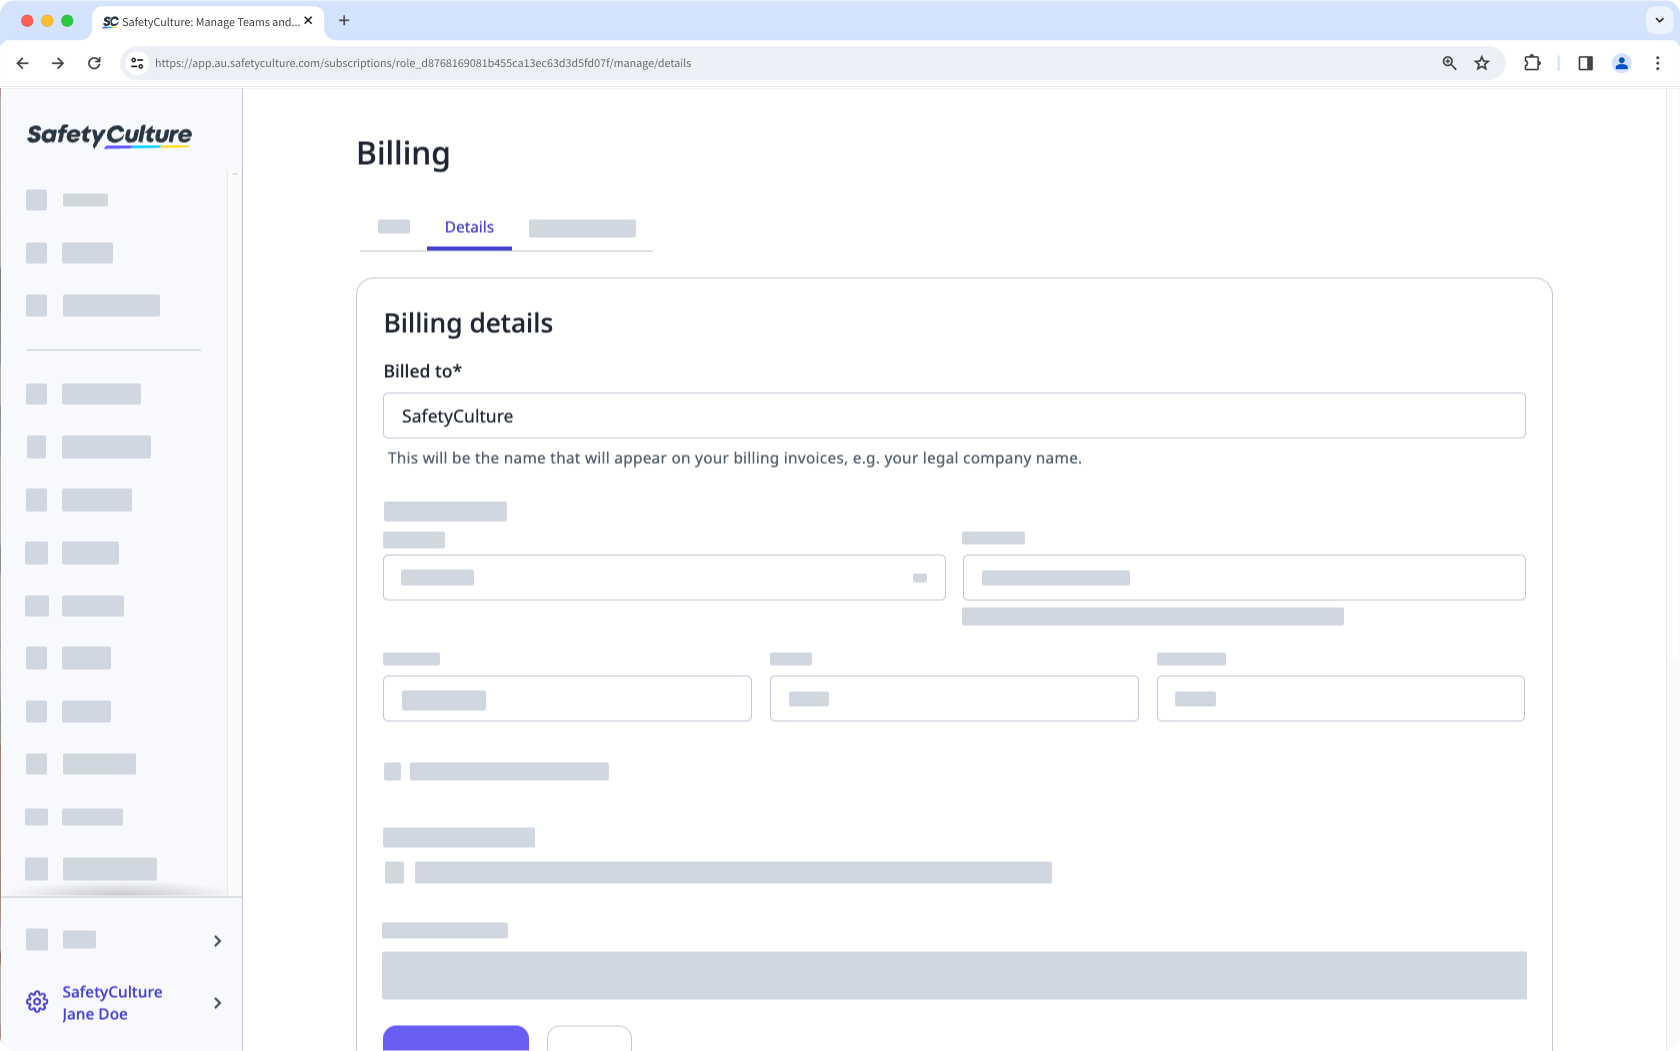 Update your plan's billing name via the SafetyCulture web app